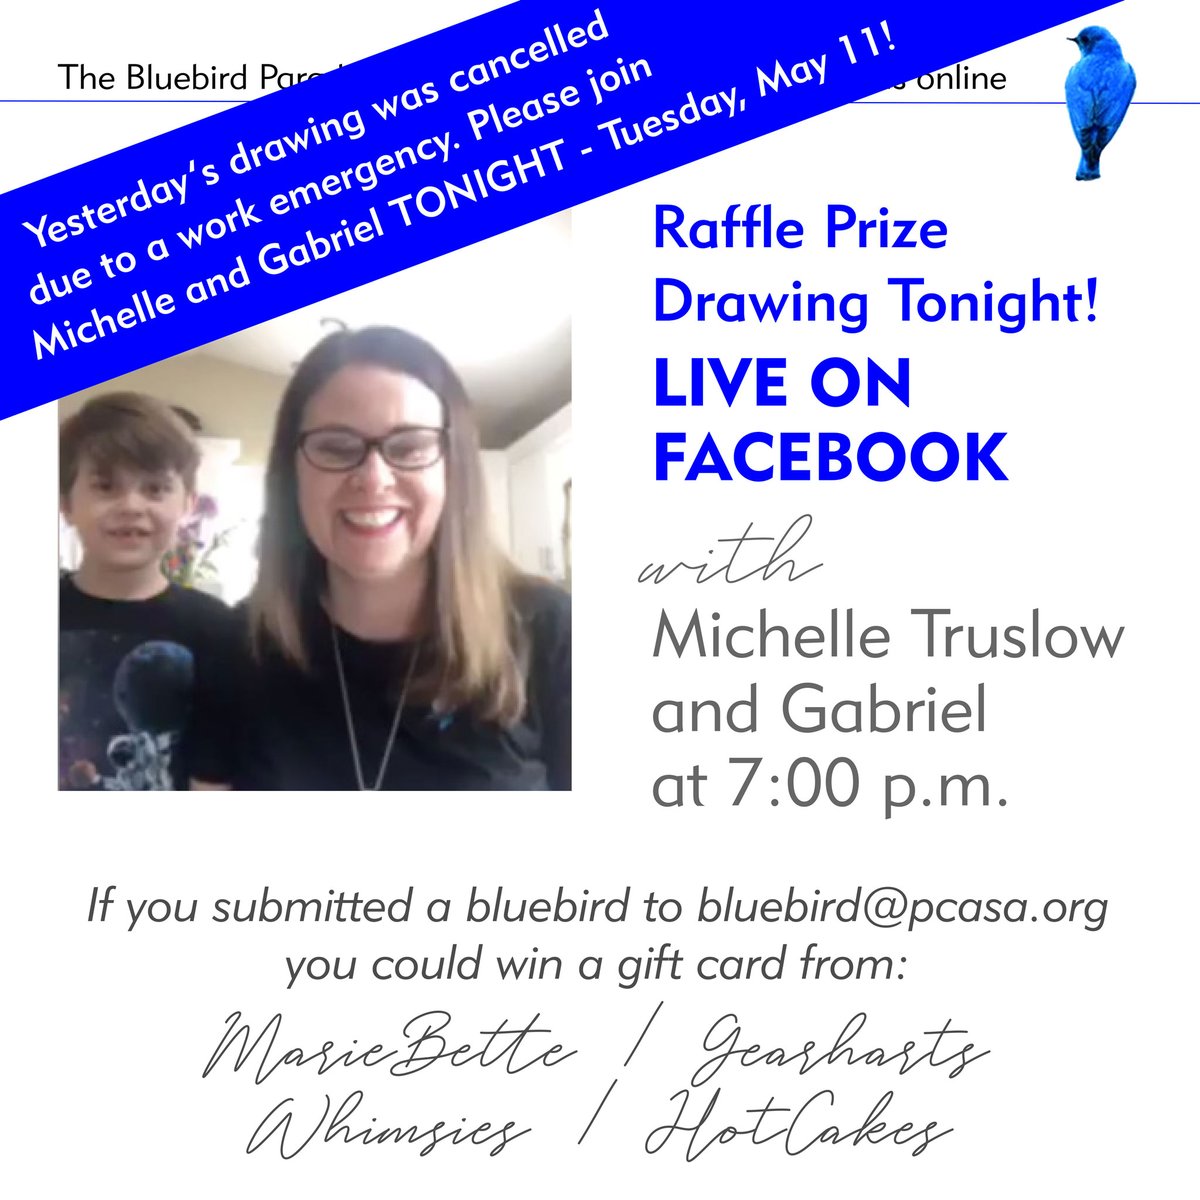 Folks who created bluebird art for 'The Bluebird Parade for Children in Foster Care' are winning gift cards from MarieBette, Gearharts, HotCakes, and Whimsies. Tune in to the FCAAC page tonight to see who wins this week! bit.ly/2RKYypM